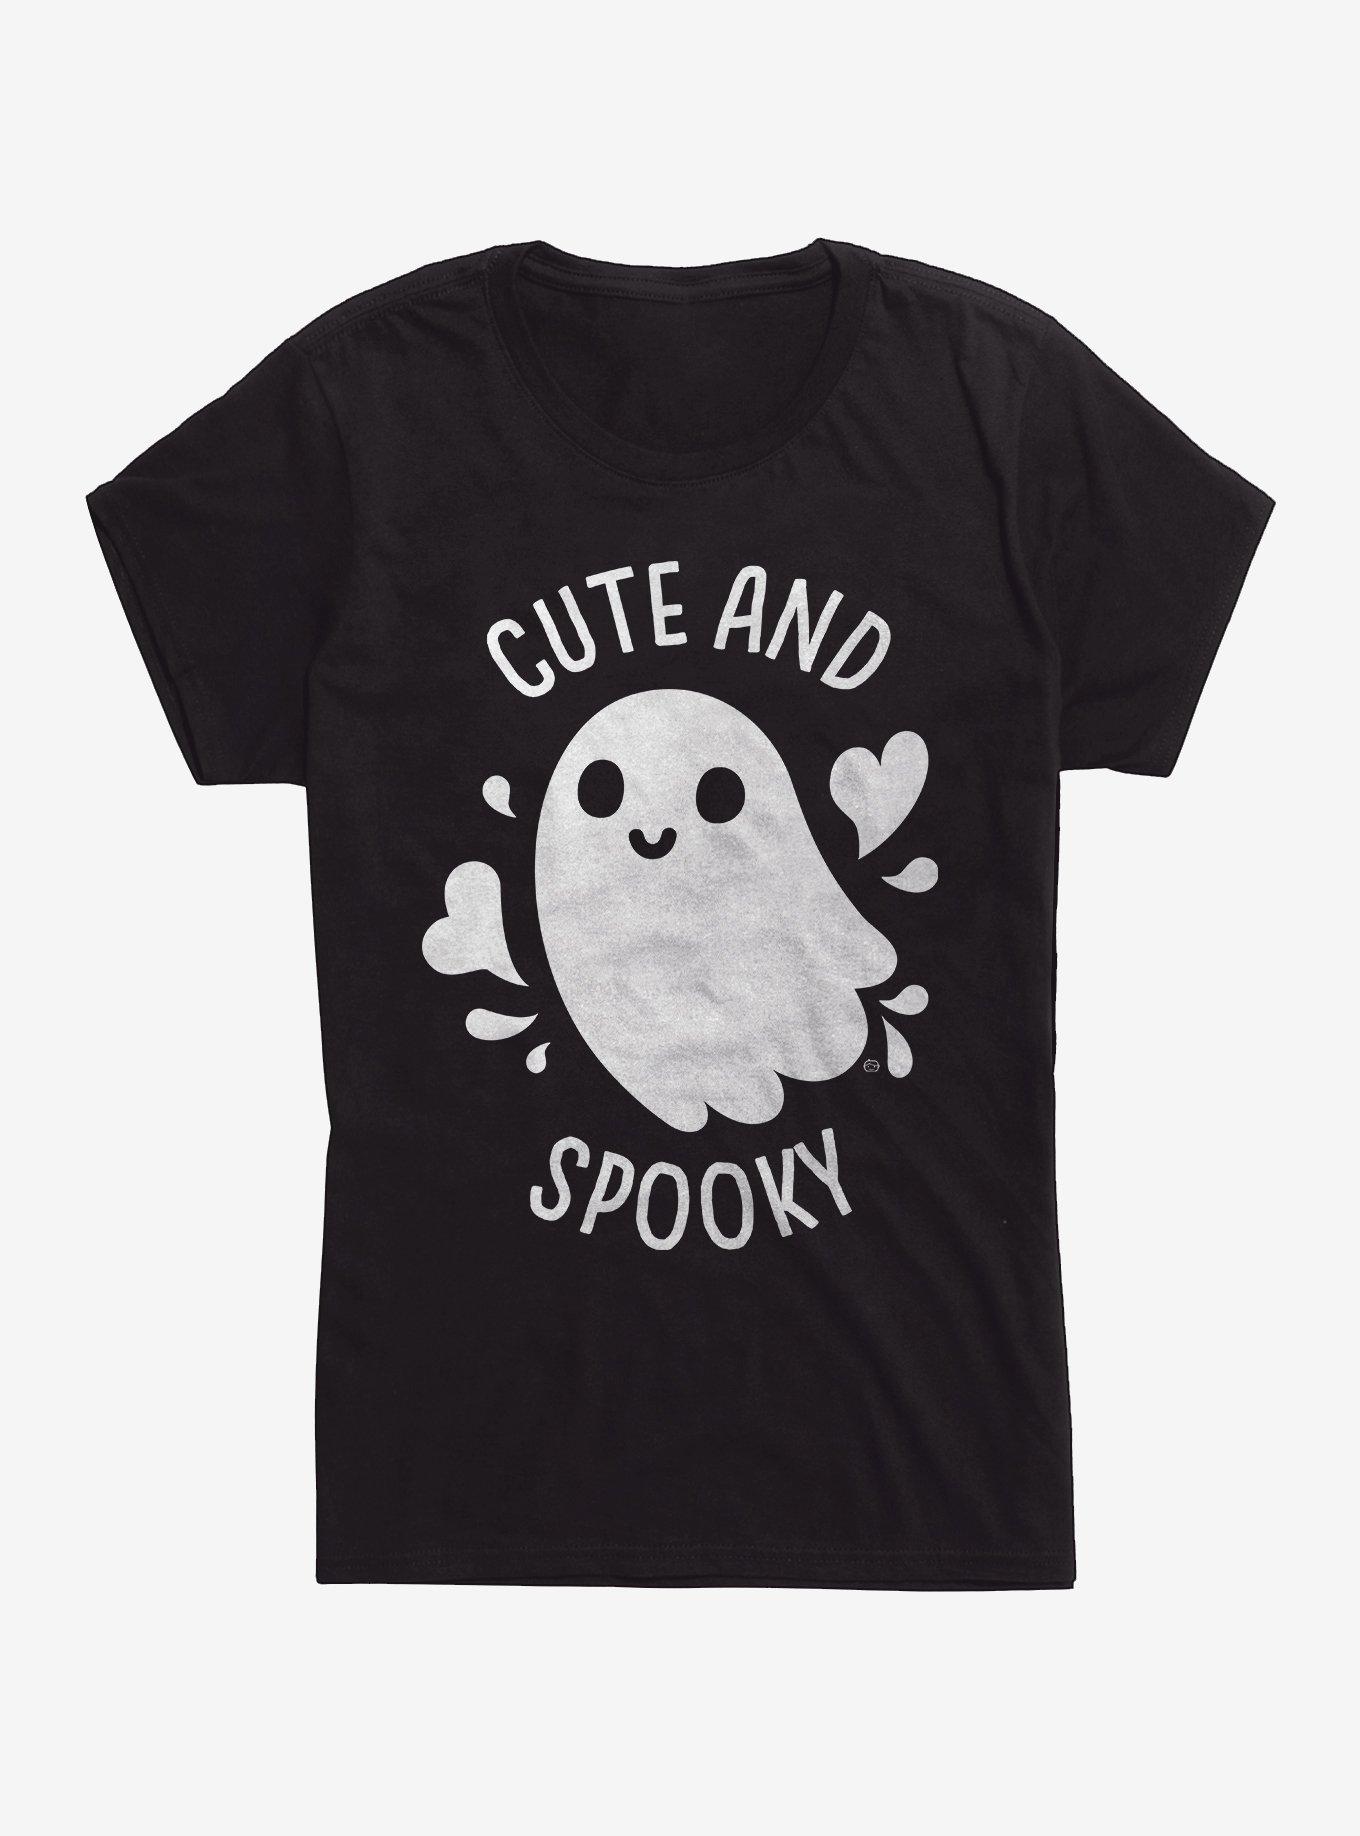 Cute And Spooky Ghost Girls T-Shirt, BLACK, hi-res